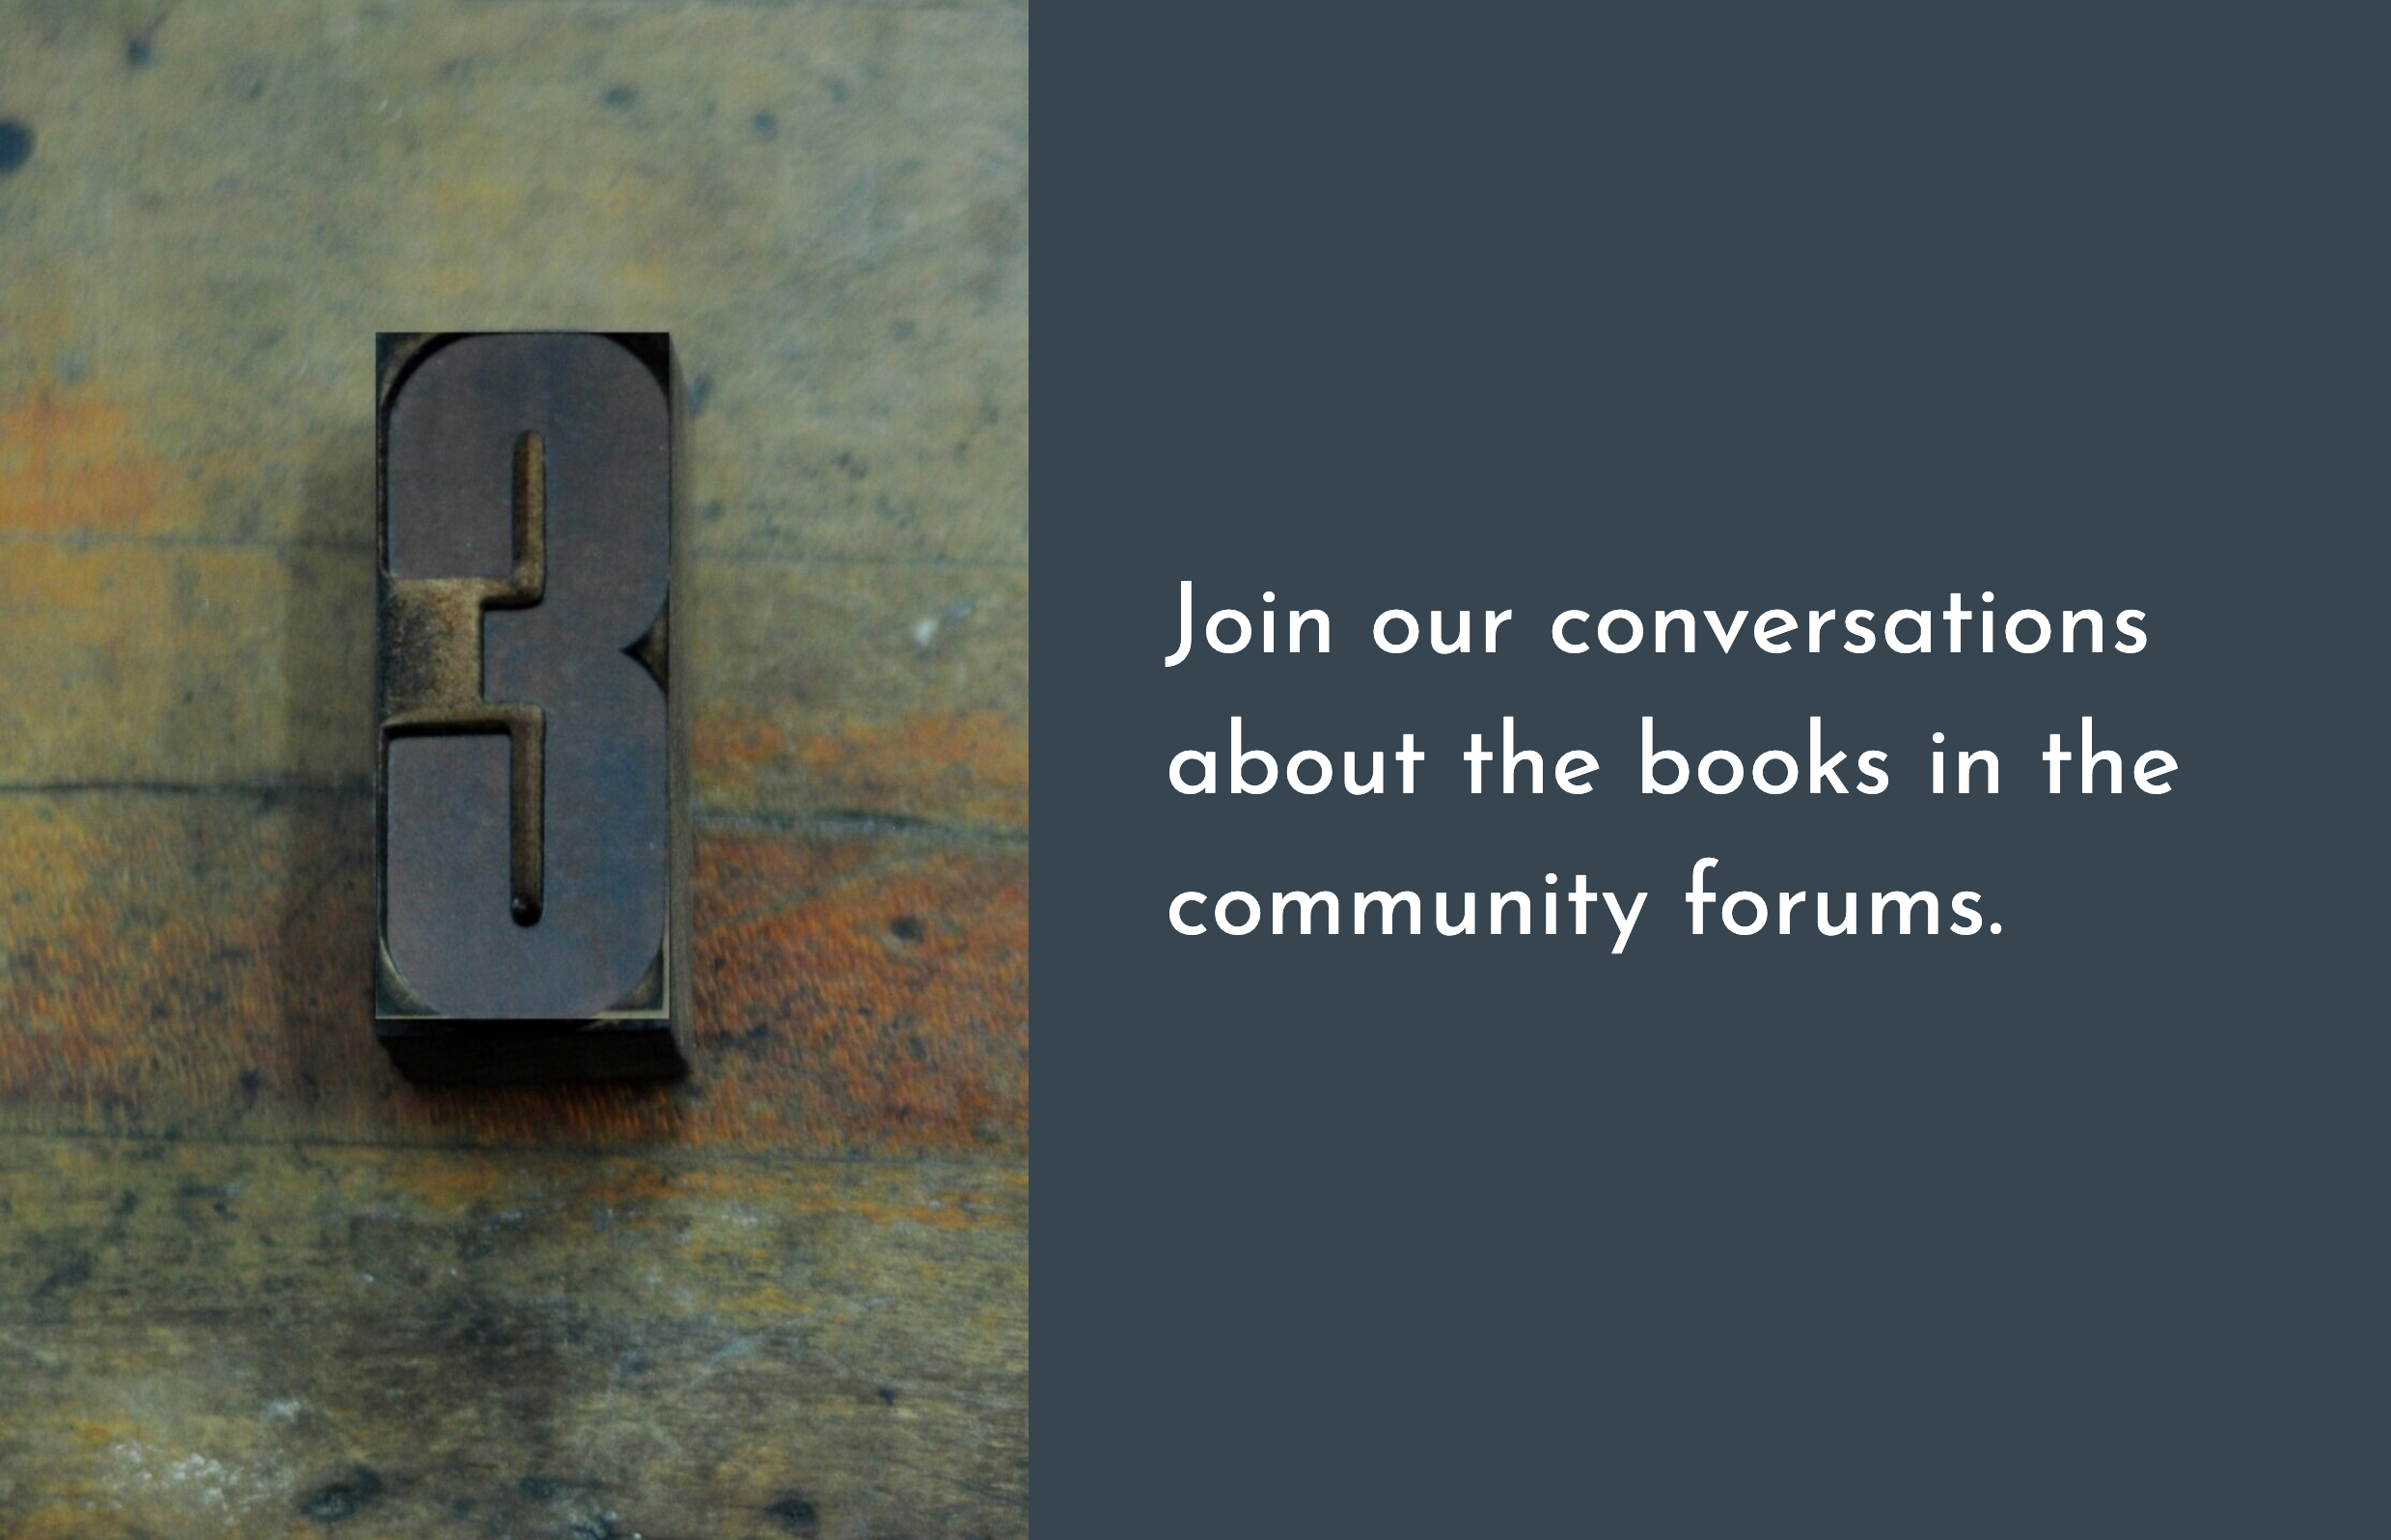  Join our conversations about the books in the community forums. 